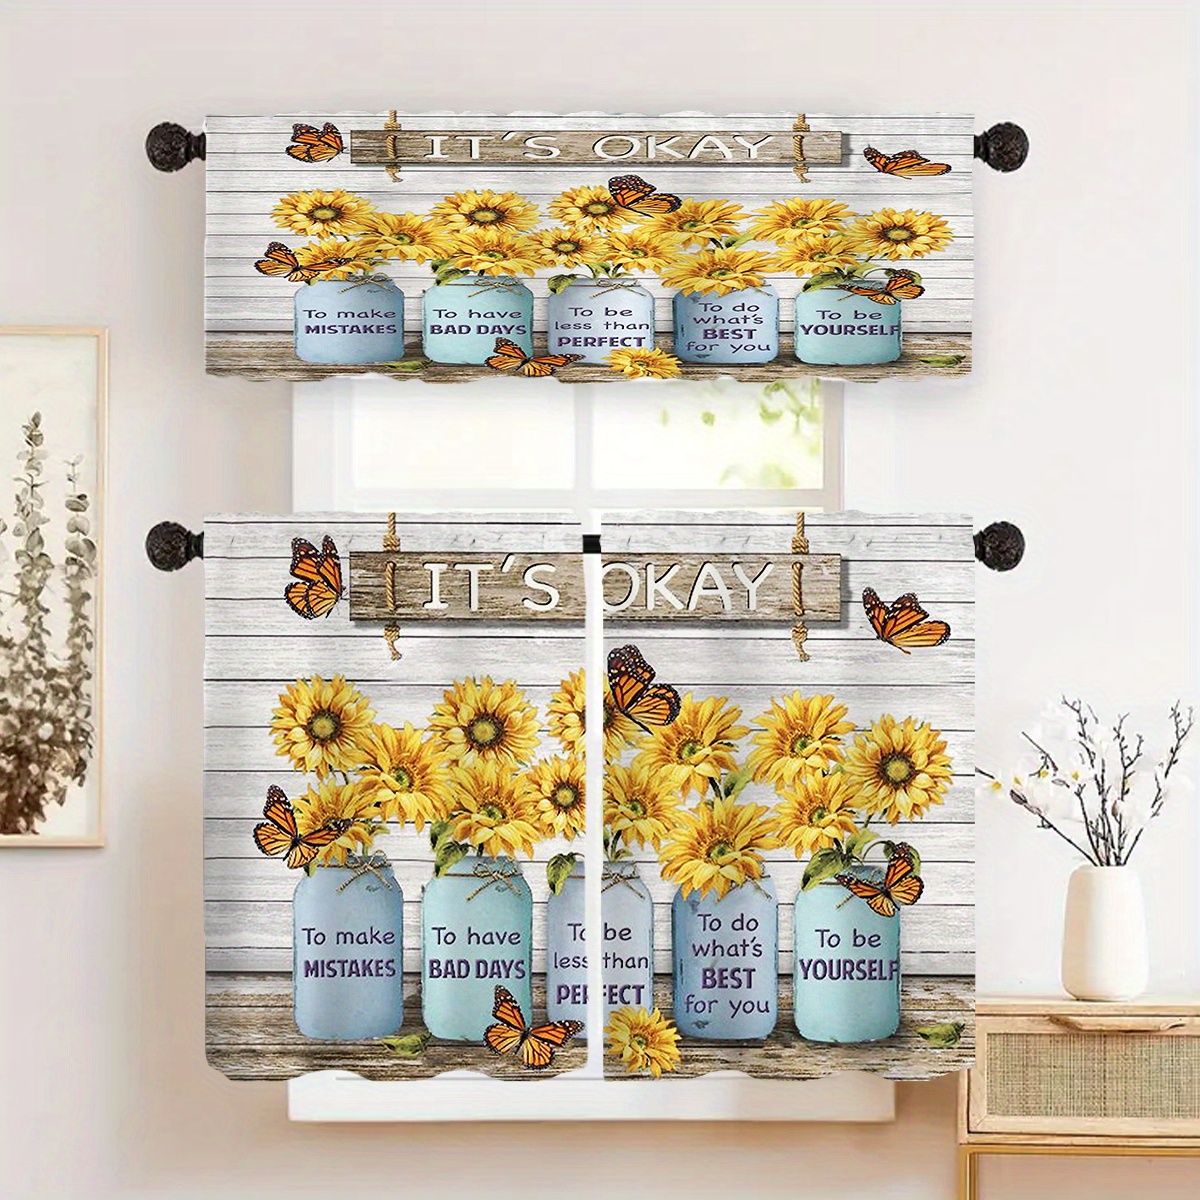 

Sunflower & Butterfly Wooden Vase Printed Curtains - Semi-sheer, Rod Pocket Design For Living Room, Bedroom, Kitchen, Bathroom, And More - Washable Polyester Farmhouse Decor, 1pc/2pcs Set